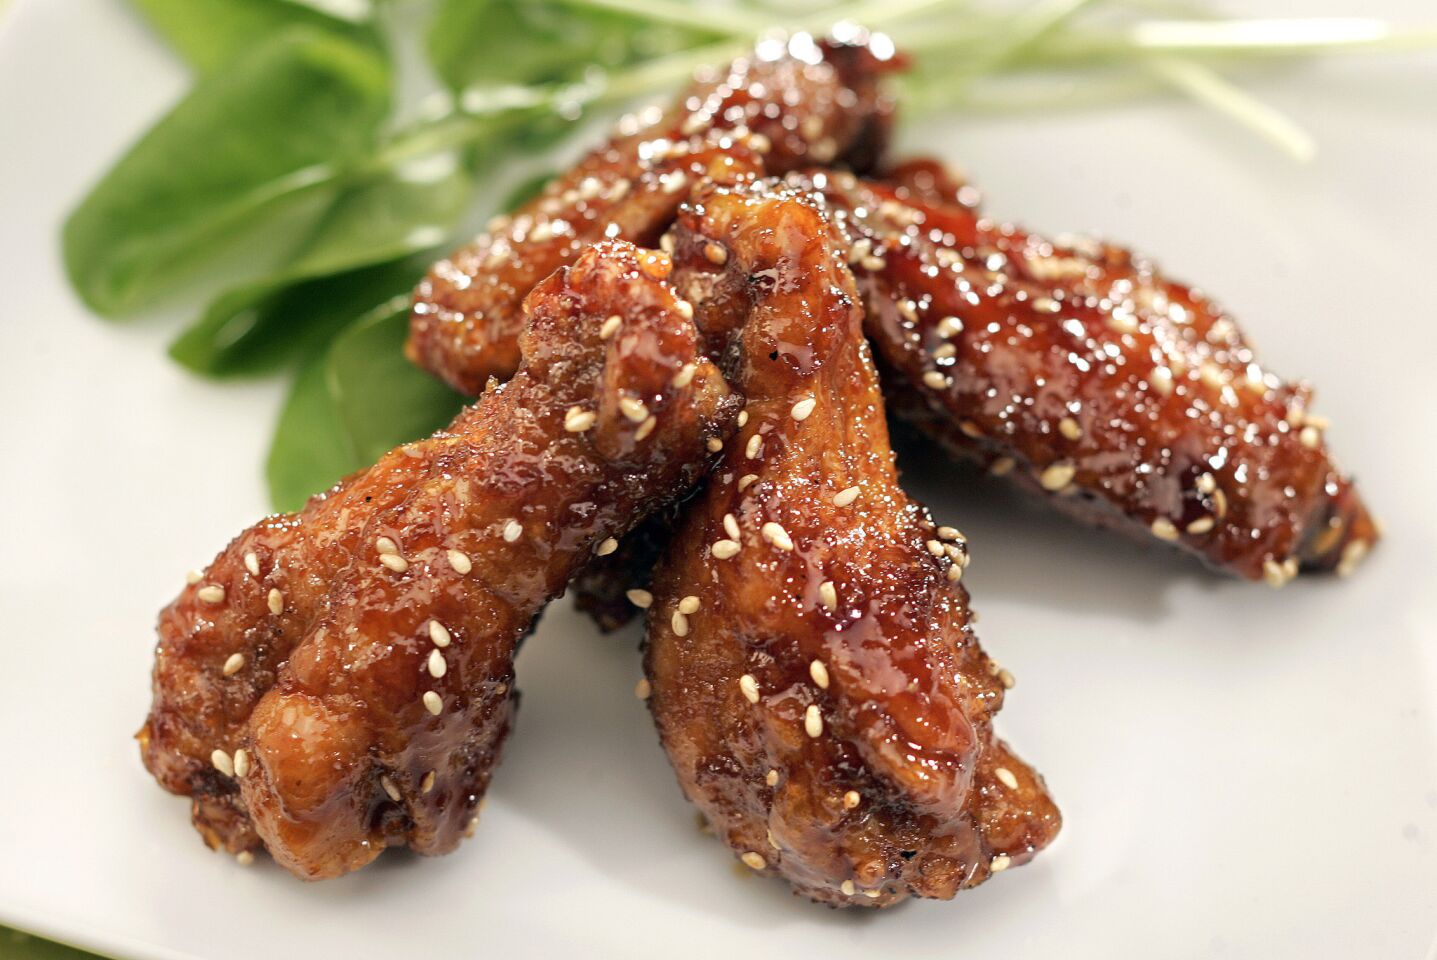 Sweet and tangy, these wings are sure to please.